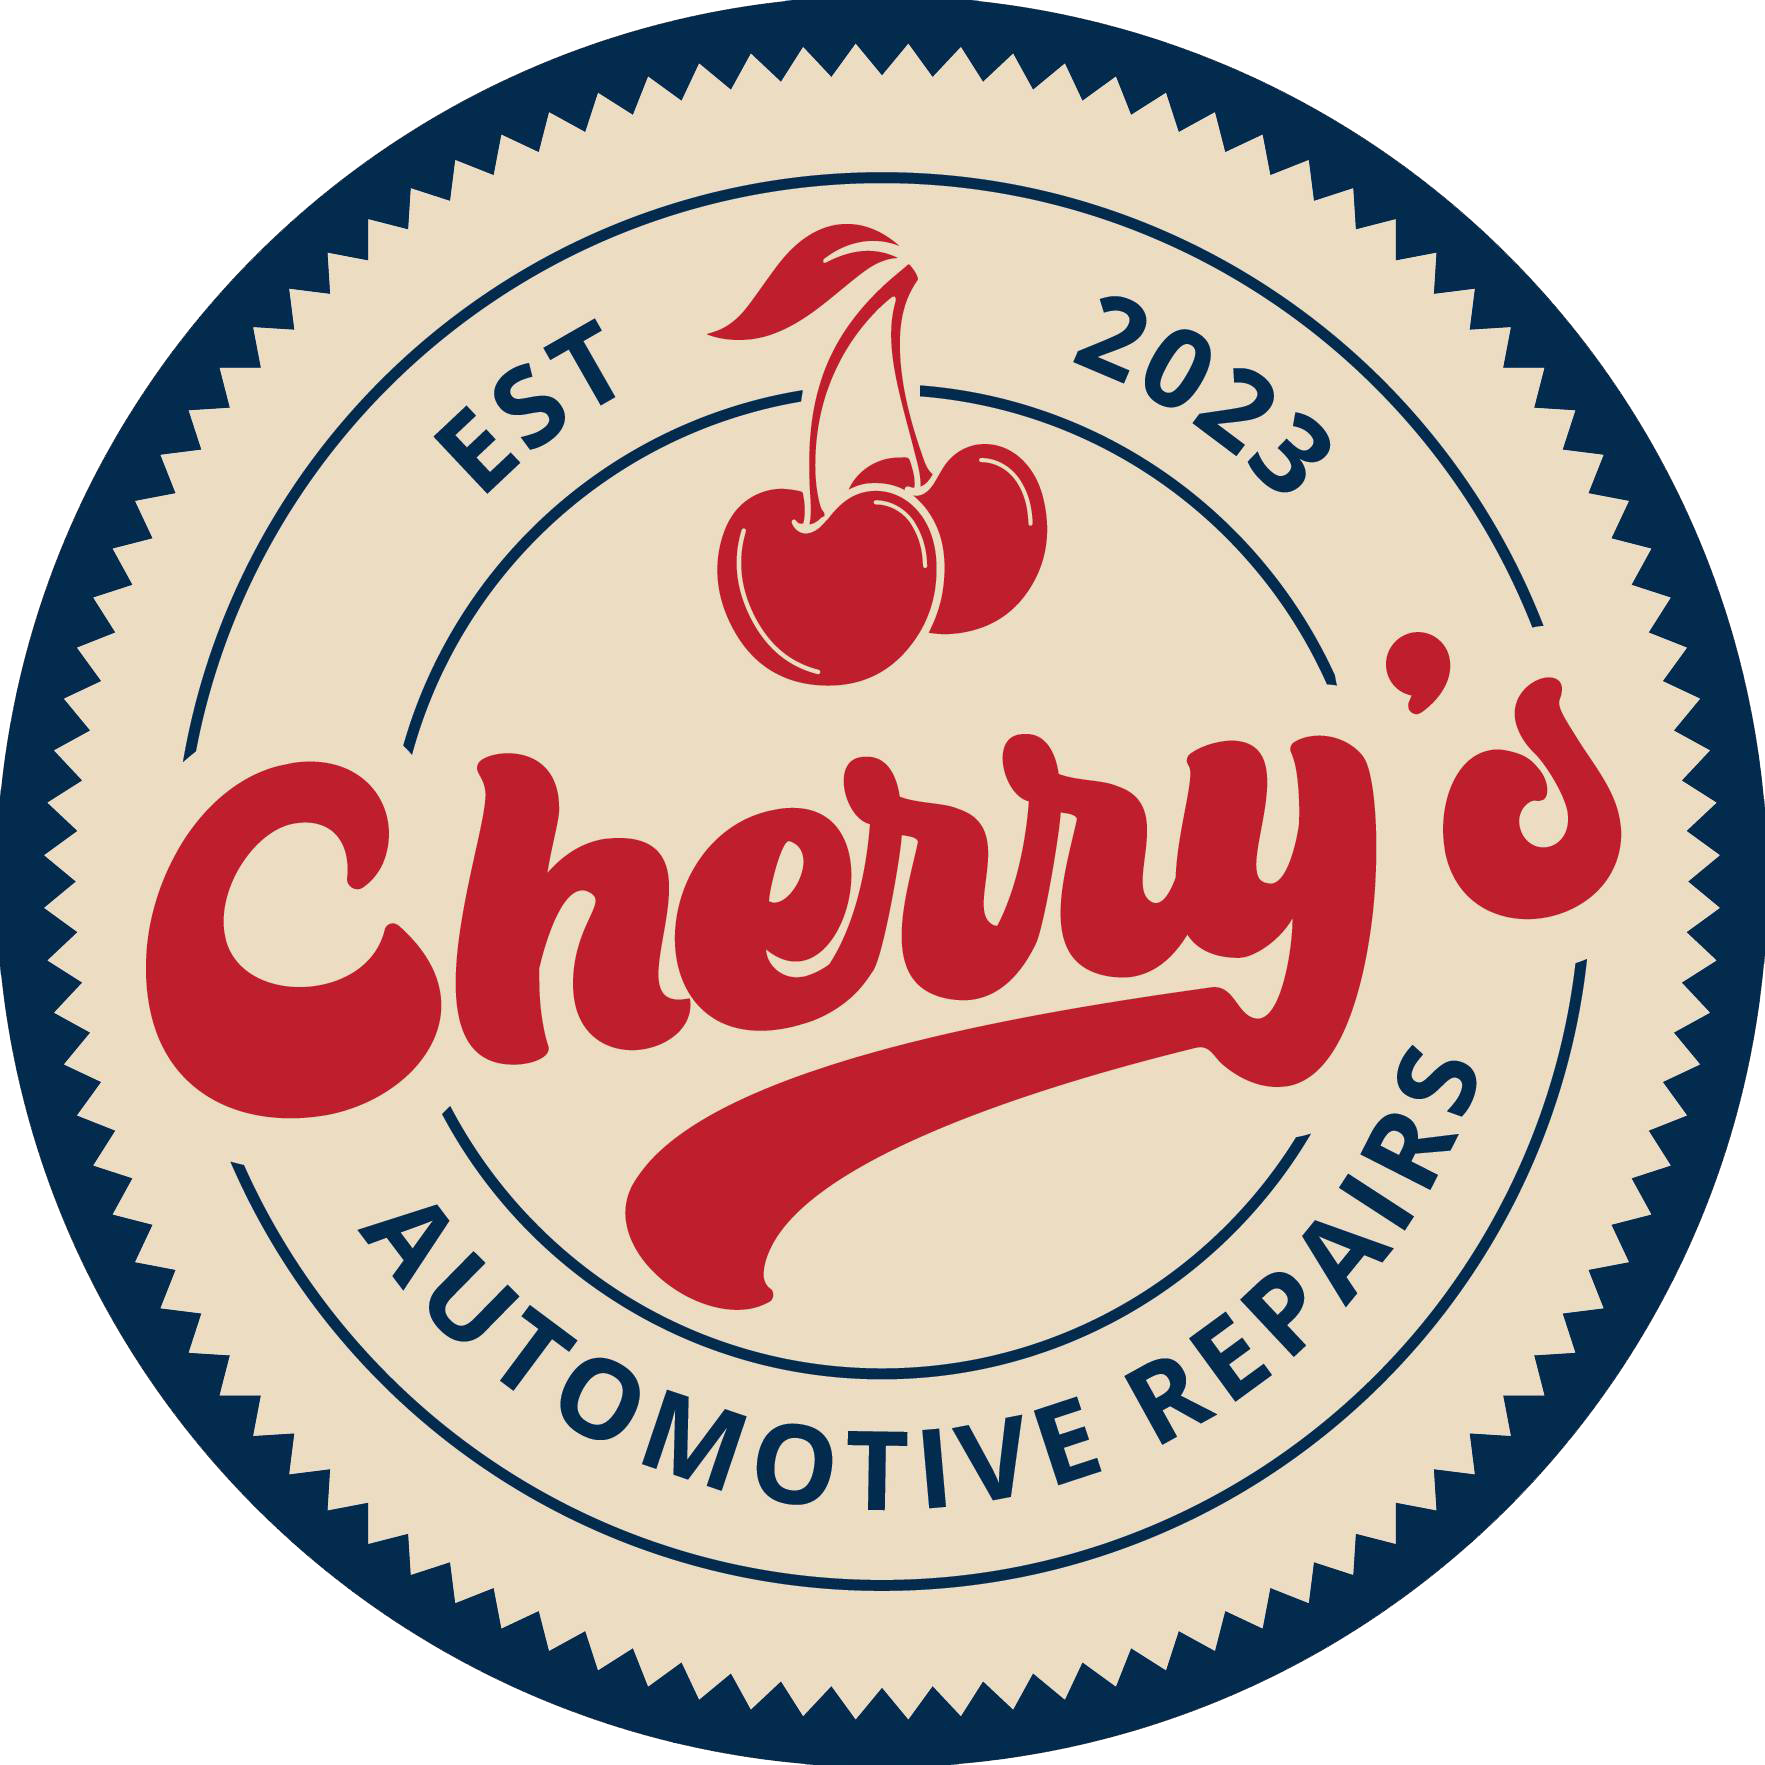 Cherry's Automotive Repairs: Your Local Mechanic in Maitland